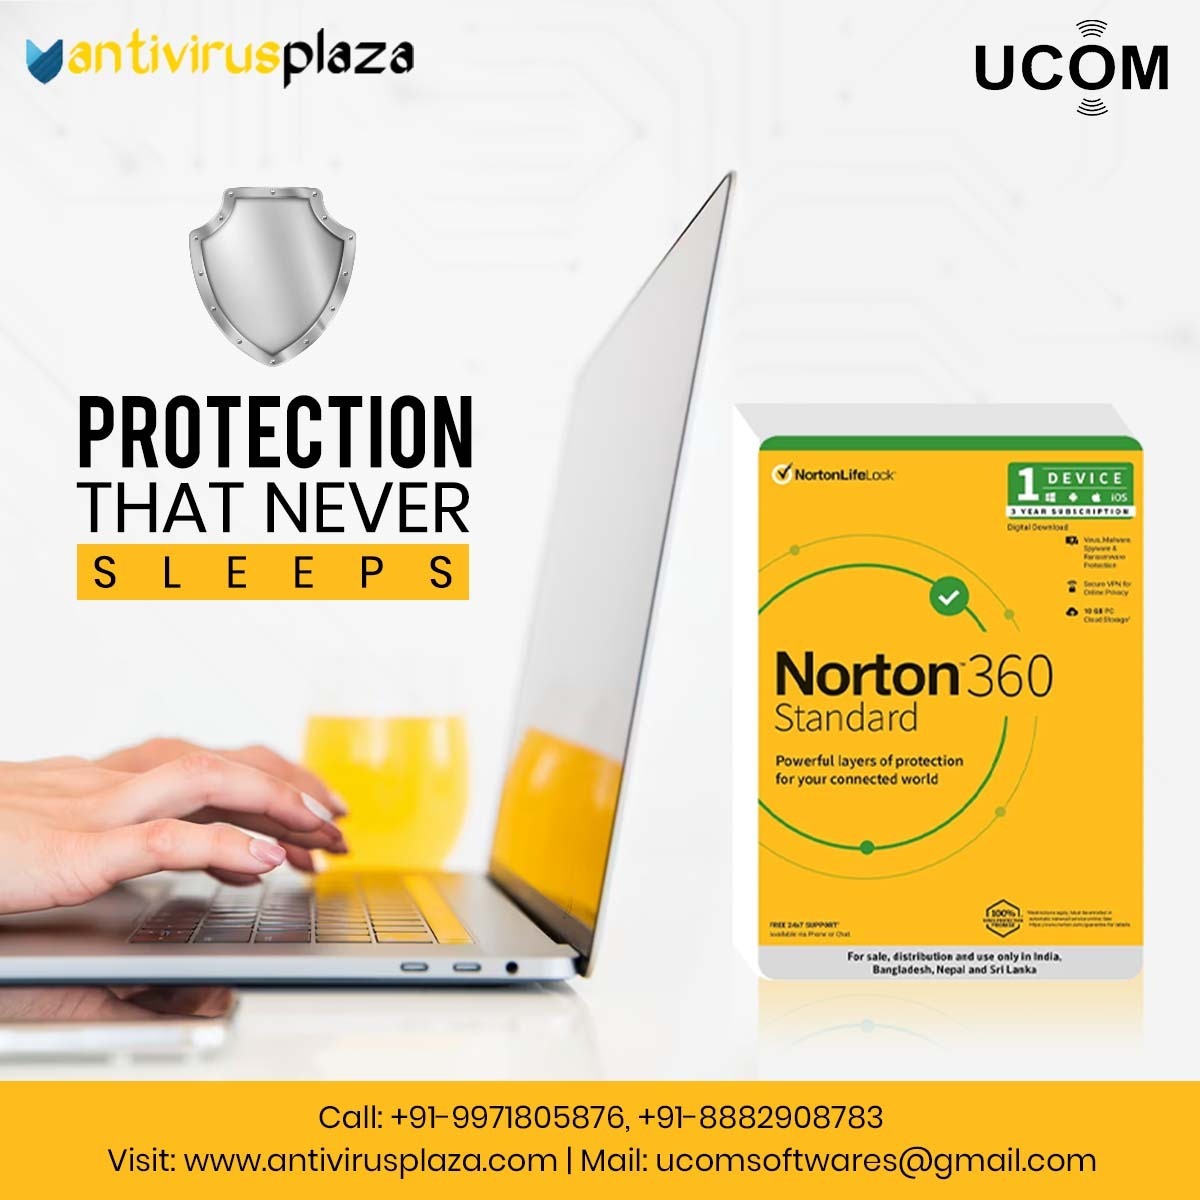 Norton 360 standard antivirus has taken its place as the best antivirus. People choose it because of its quick and multiple functionalities. Install today!

𝐂𝐚𝐥𝐥: +91-99718 05876
𝐕𝐢𝐬𝐢𝐭 𝐔𝐬: antivirusplaza.com

#AntivirusPlaza #InternetSecurity #MobileSecurity